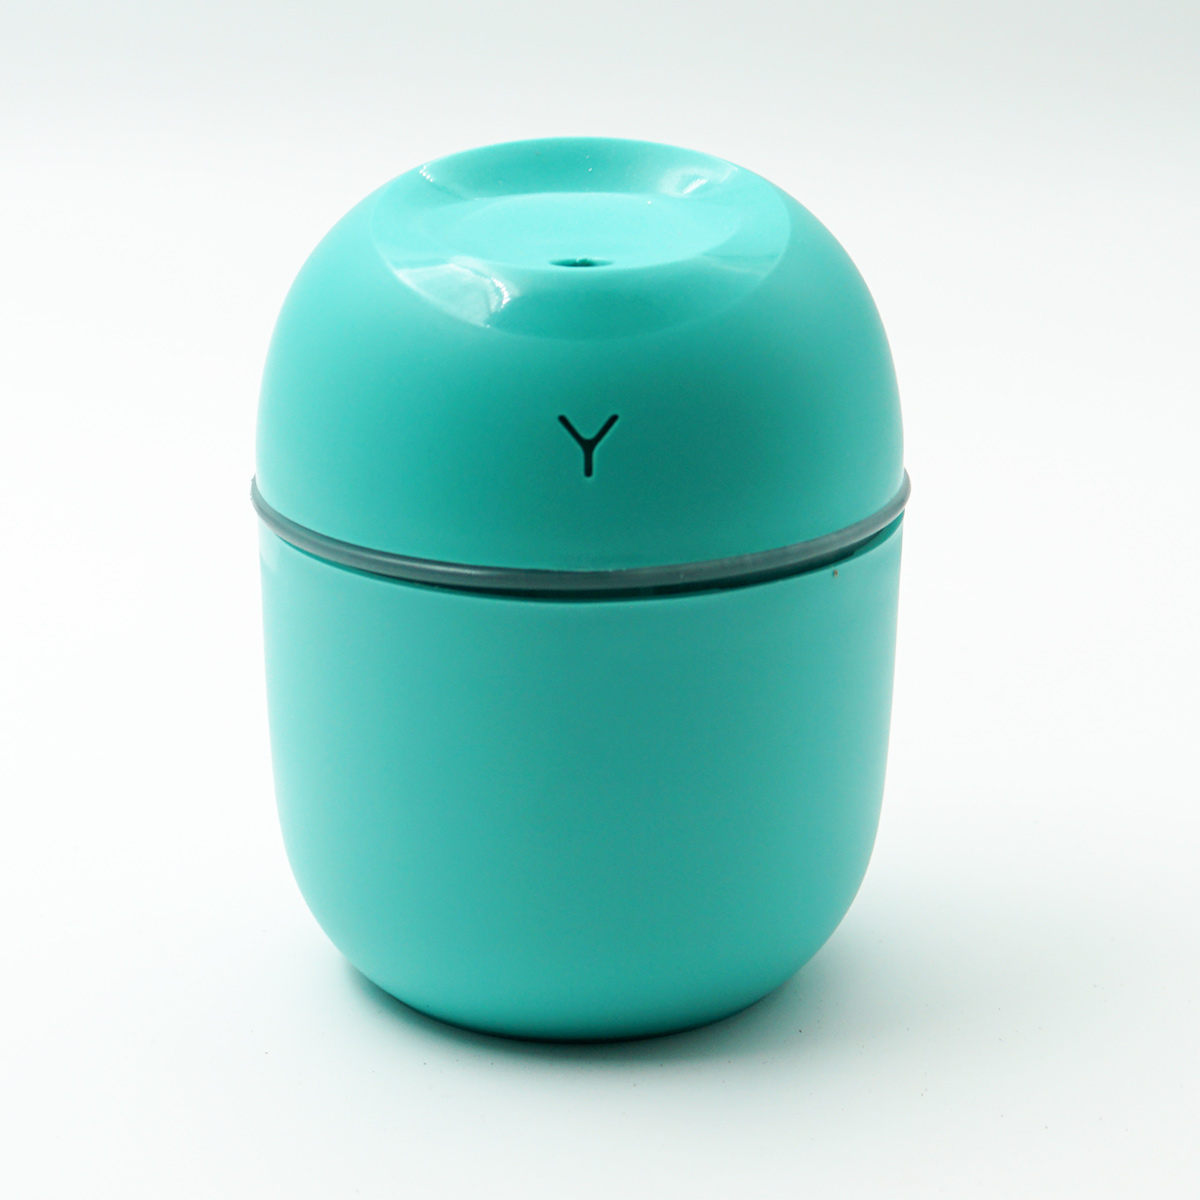 penhouse.in Green Color USB Personal Portable Mini Humidifier Small Quiet Desktop Humidifiers And Large Capacity Colorful eggs Mist Humidifier with 2 Mist Modes and Auto Shut-Off for Bedroom Office Car Travel A1 SKU 96596